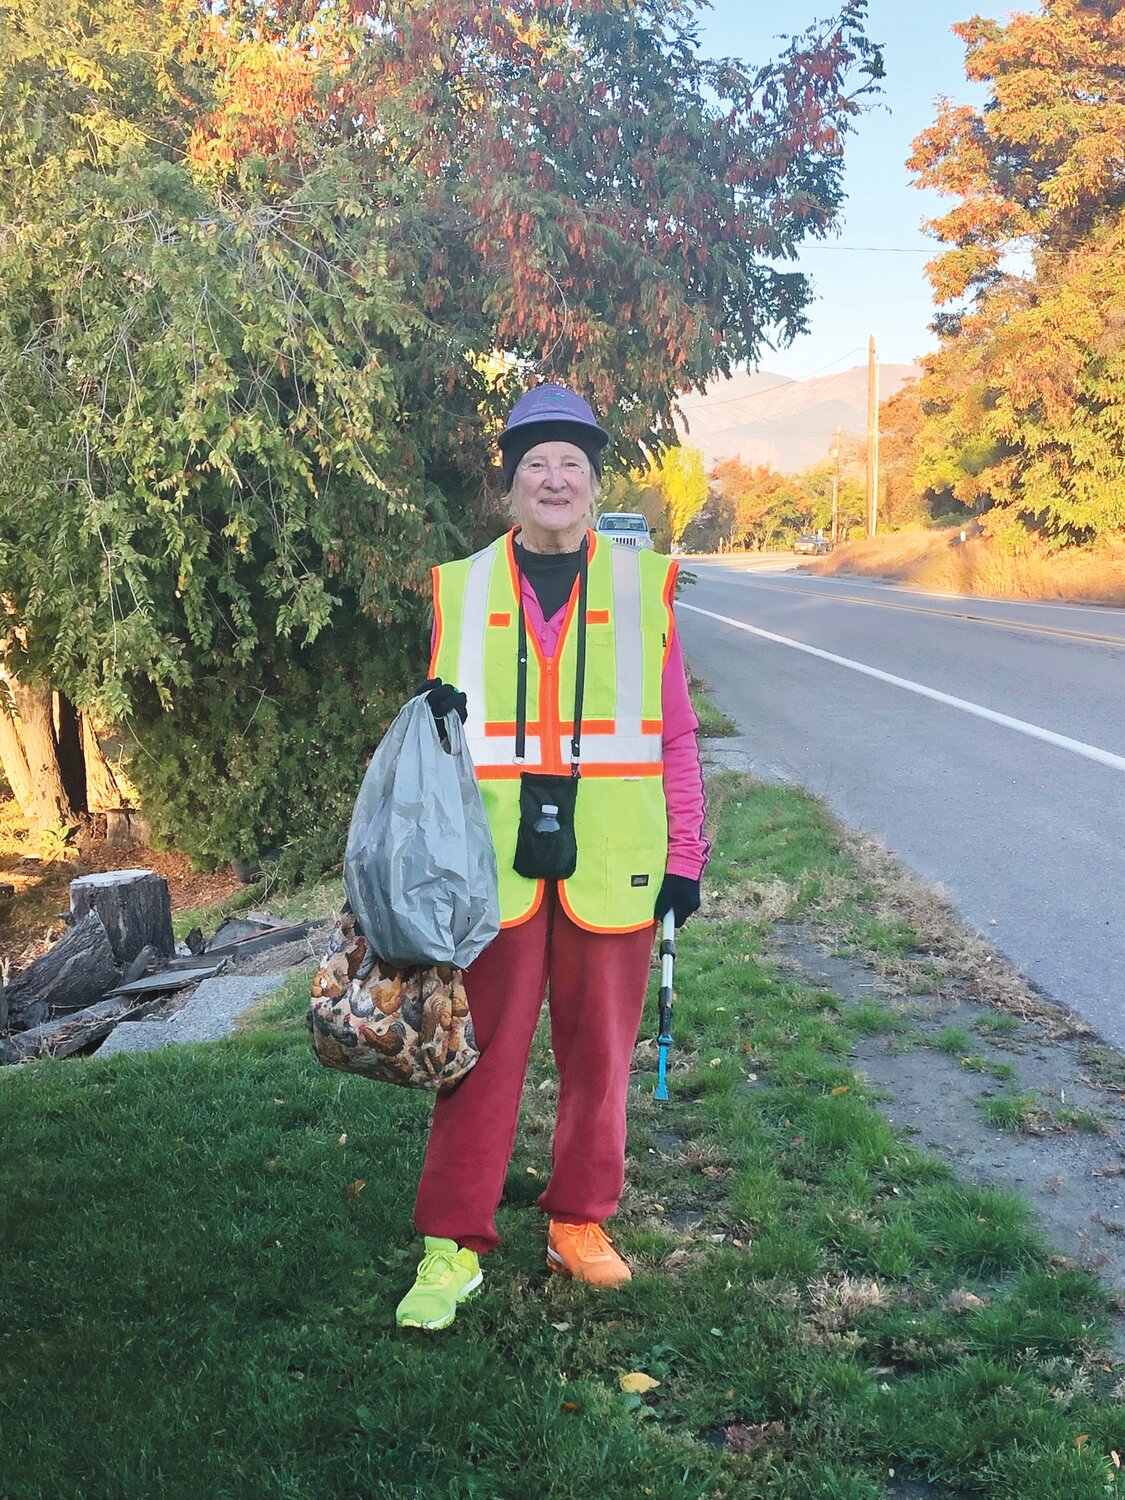 Susan Fisher pictured roadside along her daily clean-up route
KATIE LINDERT/WARD MEDIA